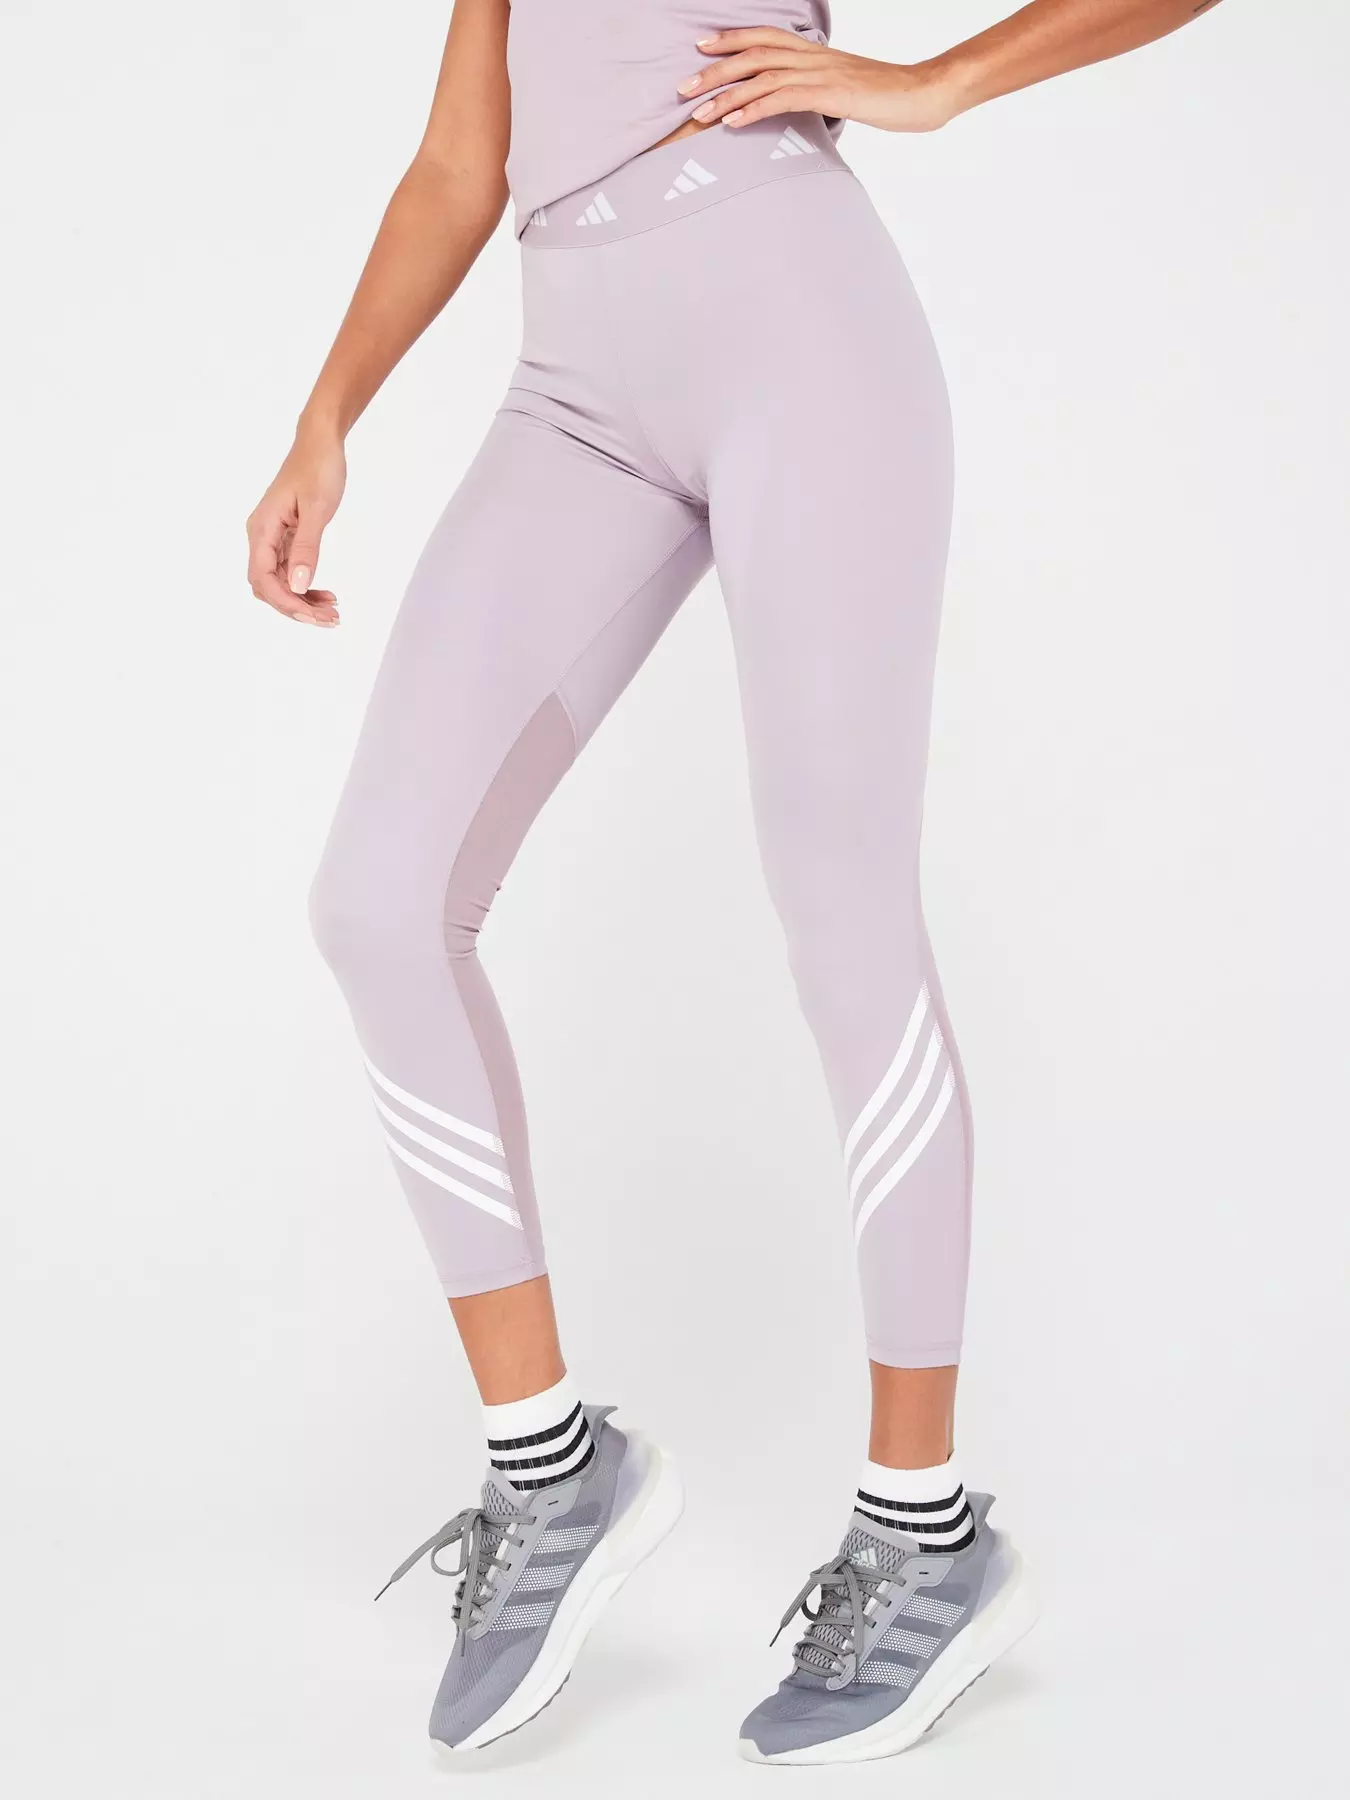 adidas Training Techfit colour block high waisted leggings in purple with  black/white side stripes